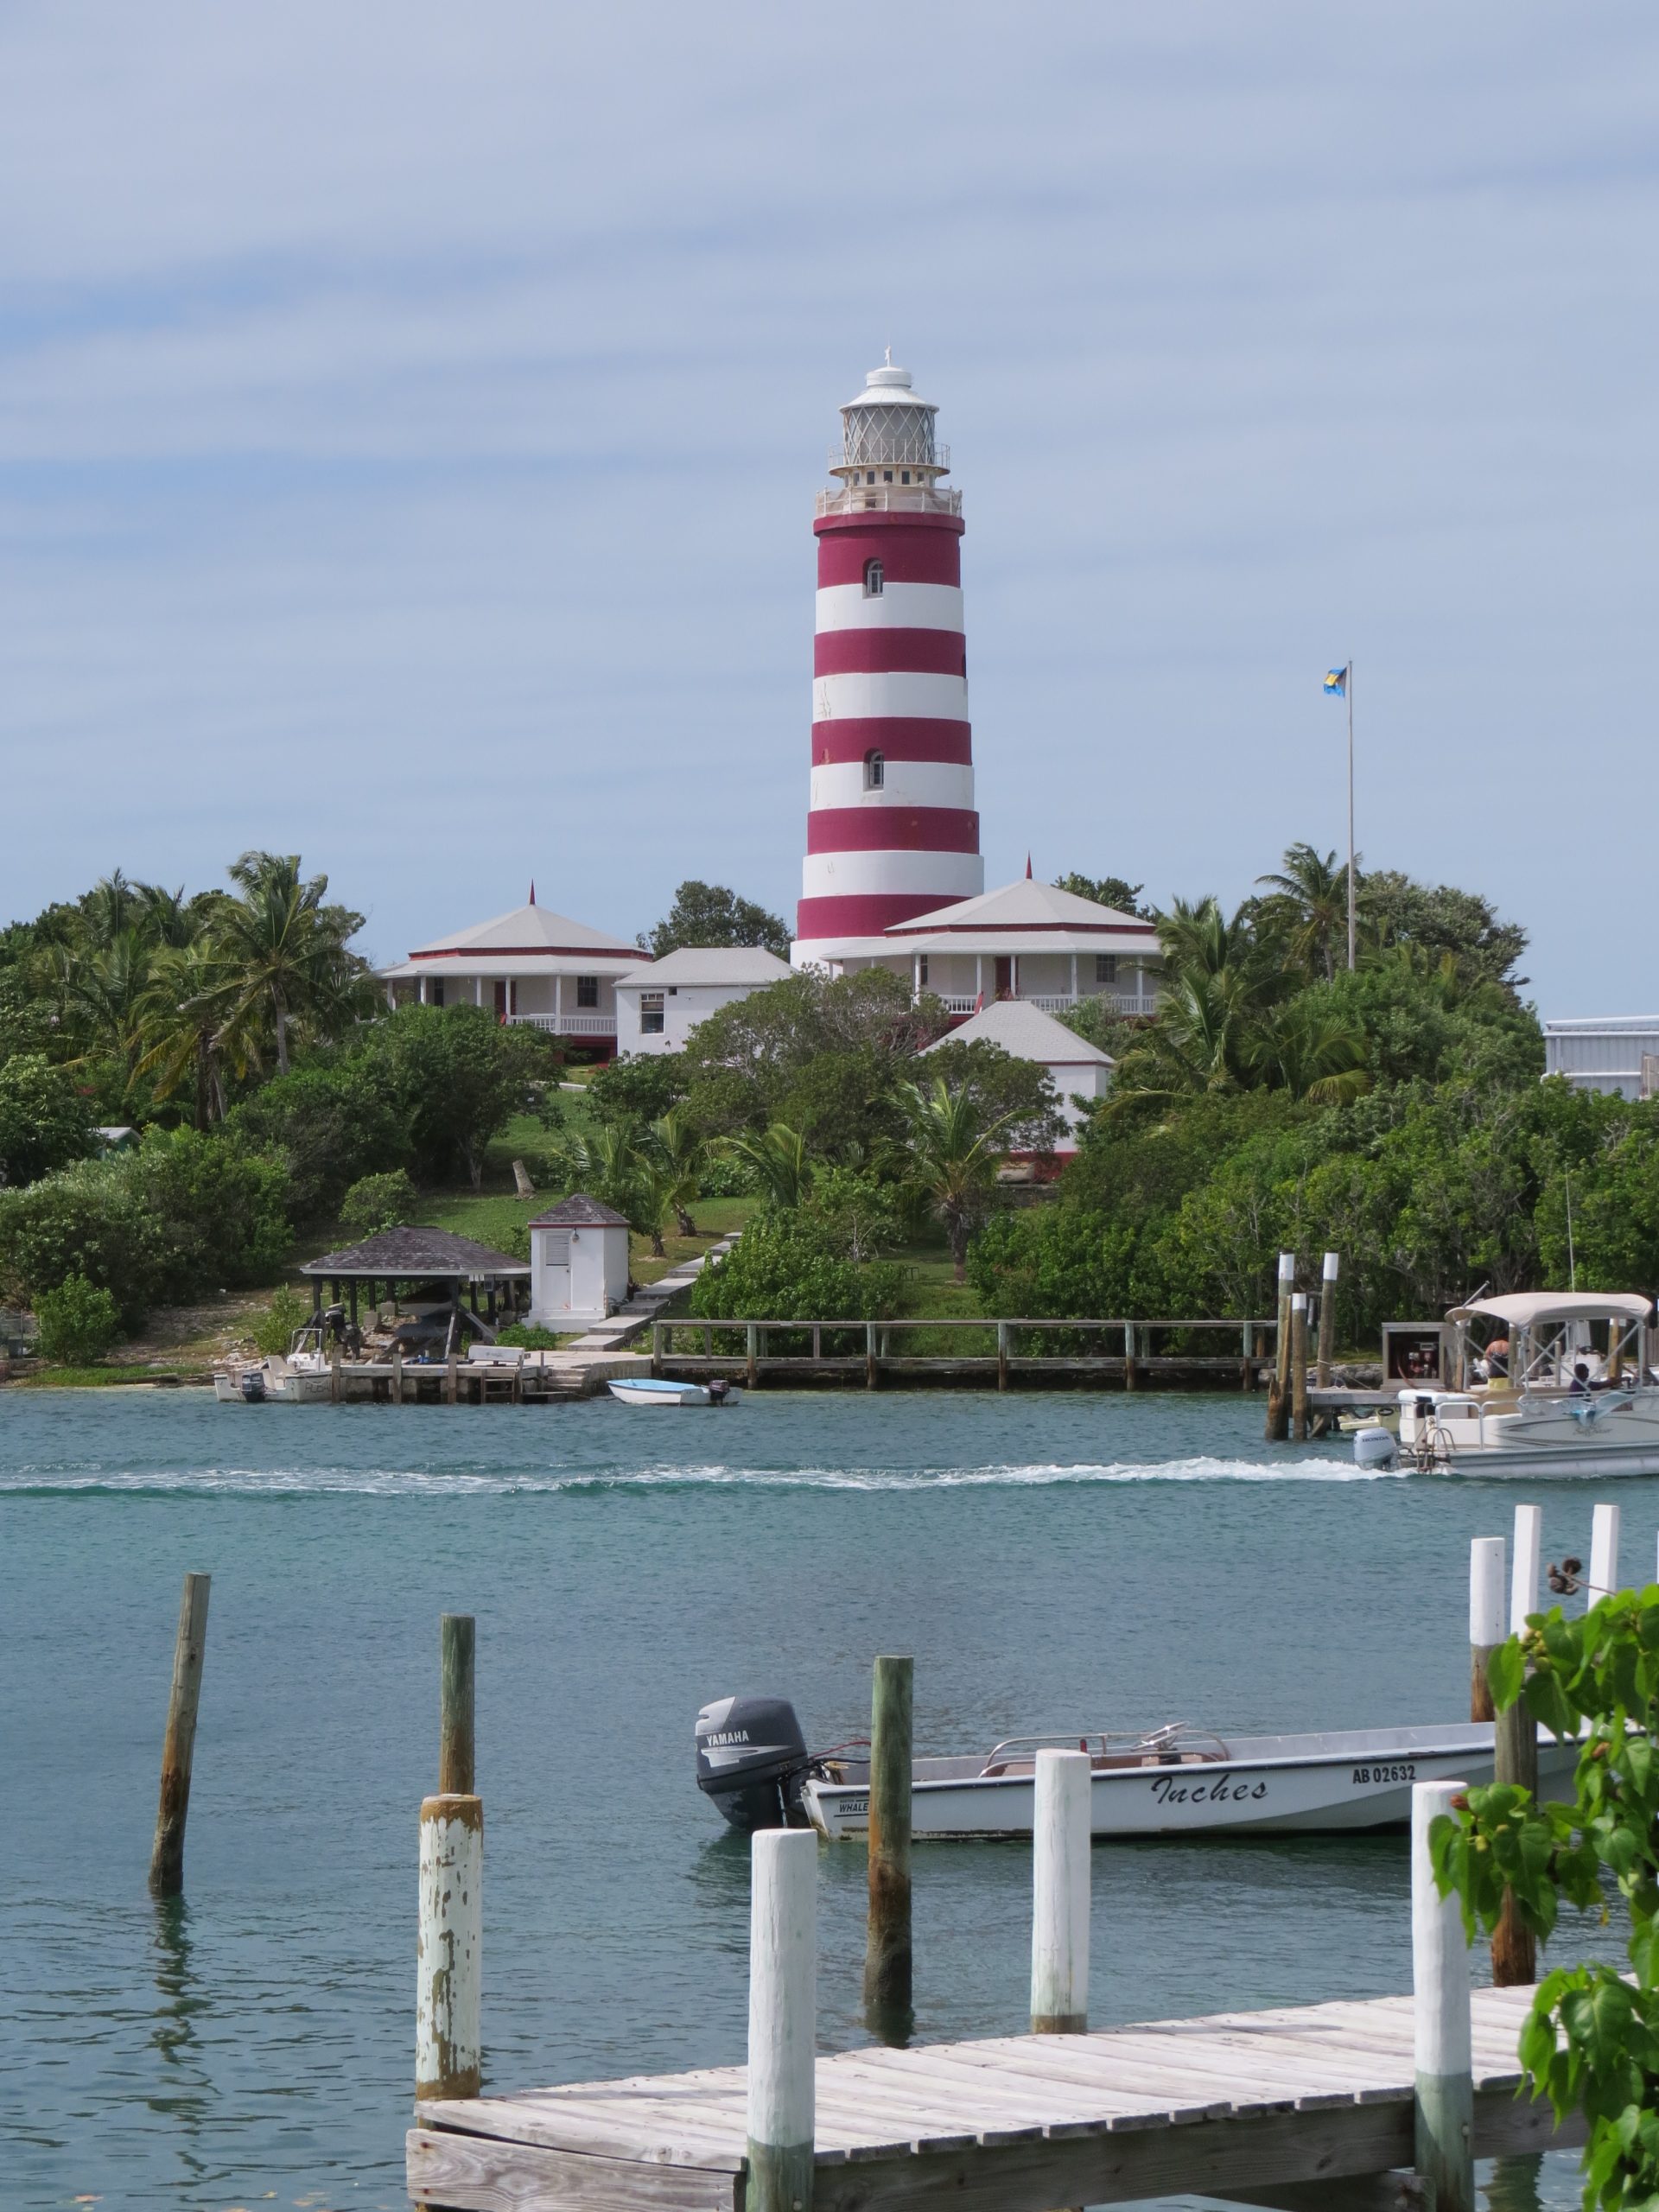 The Hope Town Lighthouse on Elbow Reef  